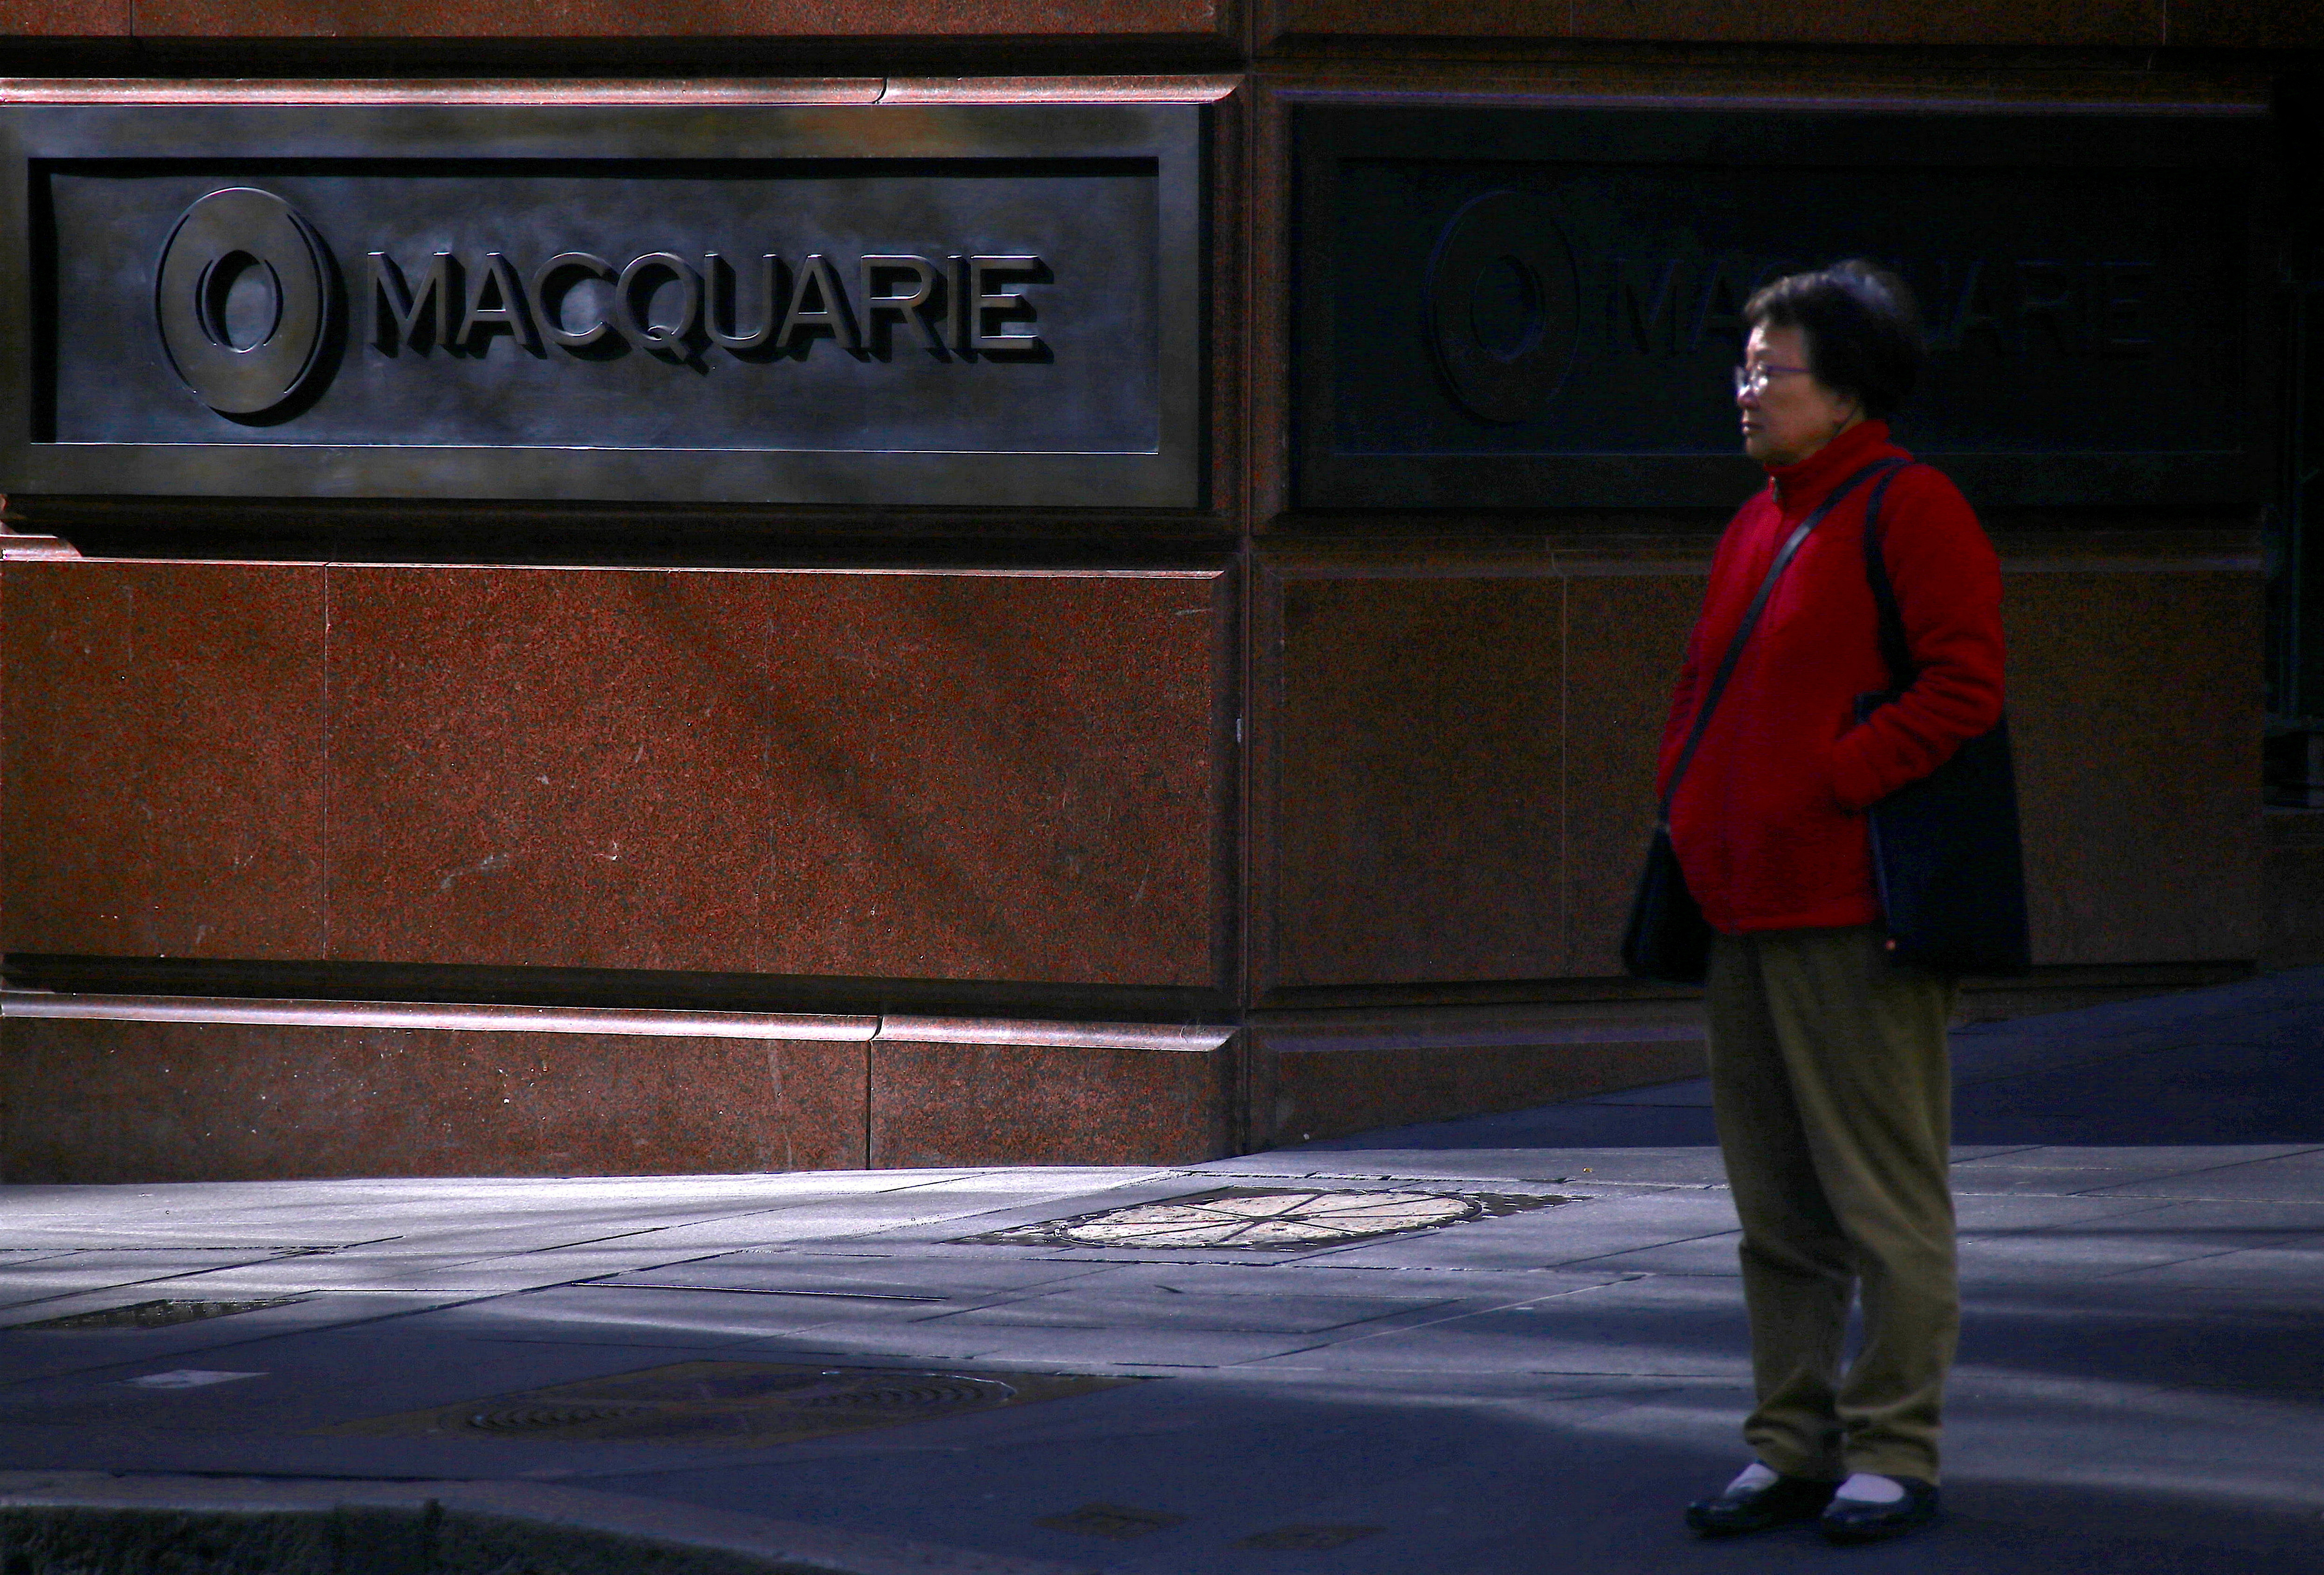 A pedestrian stands near the logo of Australia's biggest investment bank Macquarie Group Ltd which adorns a wall on the outside of their Sydney office headquarters in central Sydney, Australia